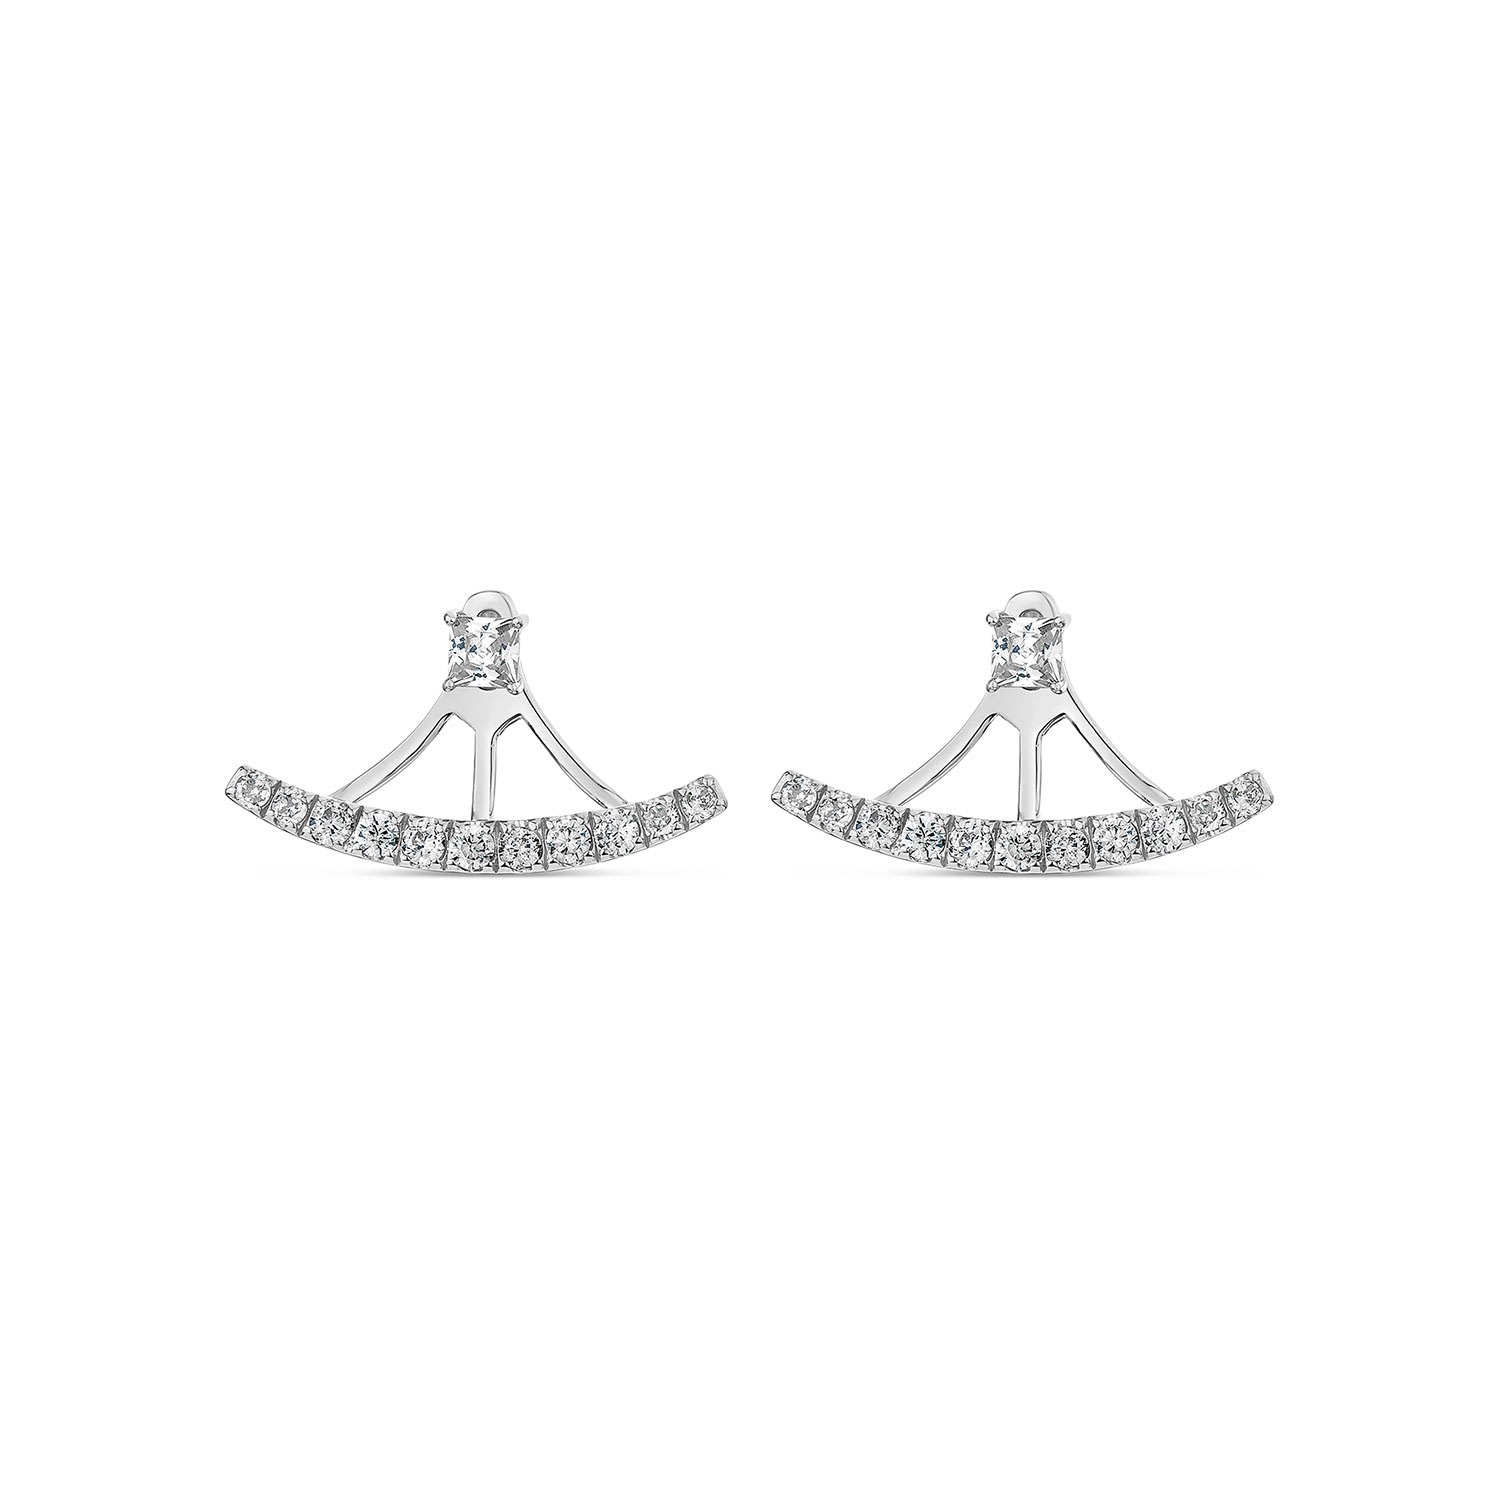 Women’s White / Silver Complete Ear Jacket With Man Made White Diamonds In Sterling Silver Sally Skoufis